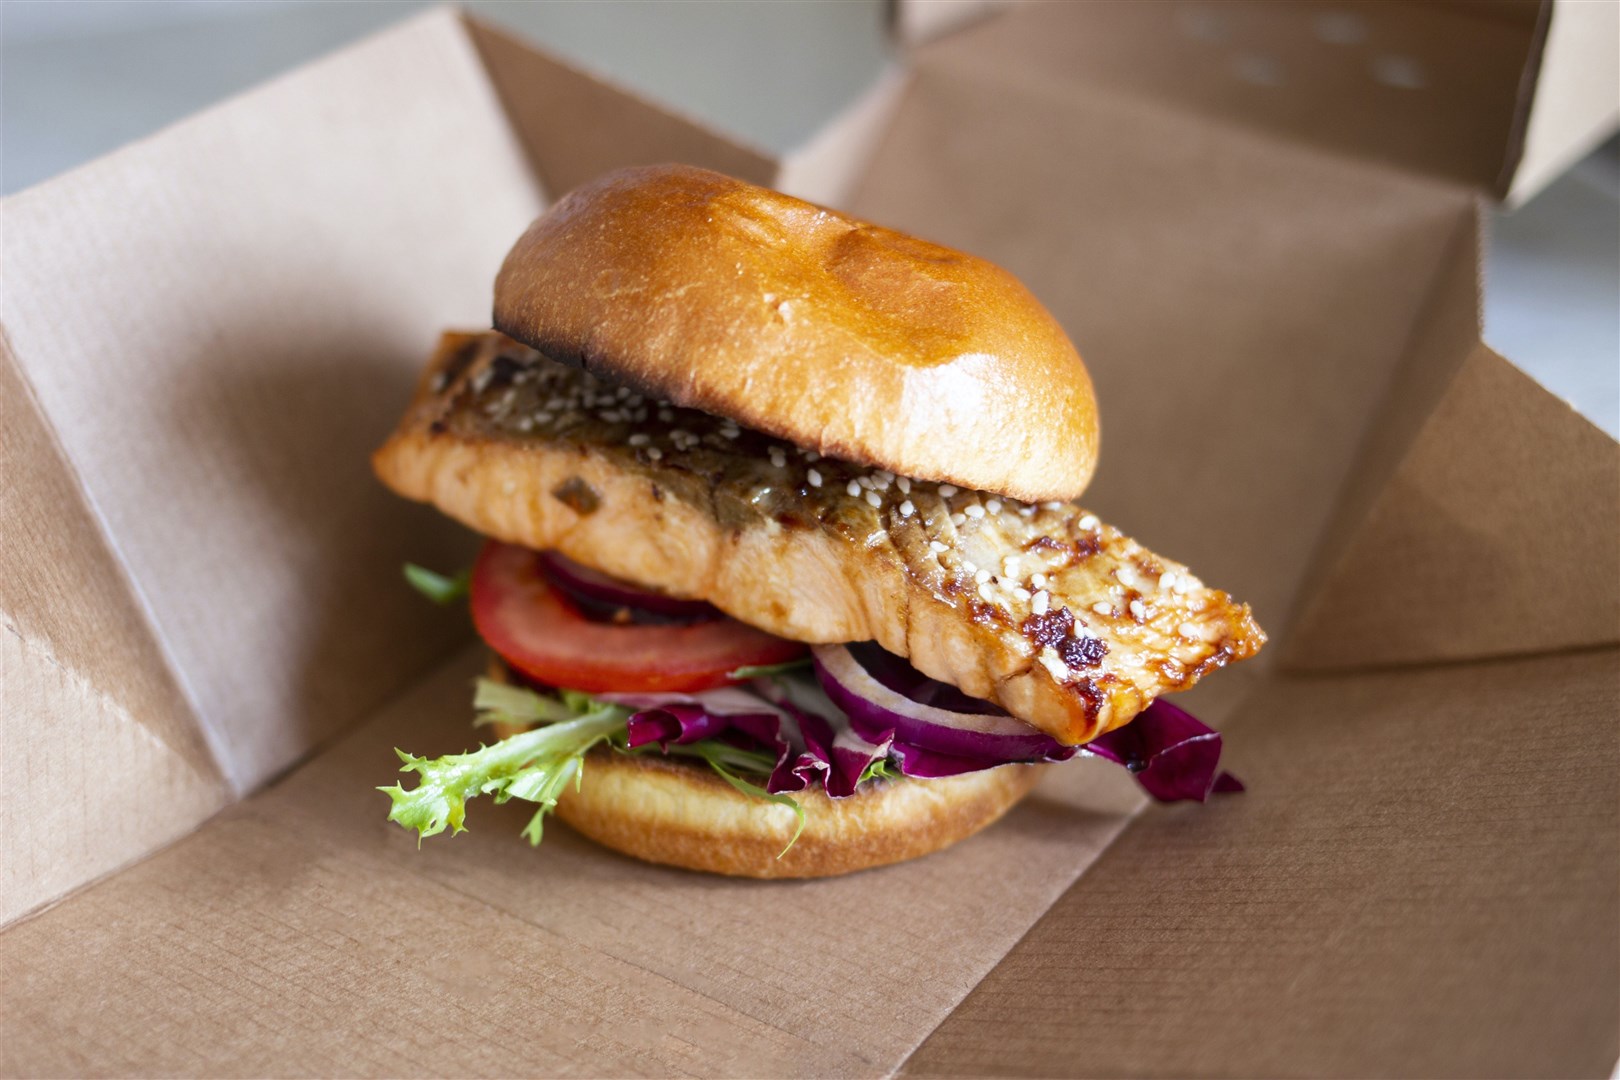 Salmon fillets burgers and noodle salads will be on the menu. Picture By: Nick Mailer Photography